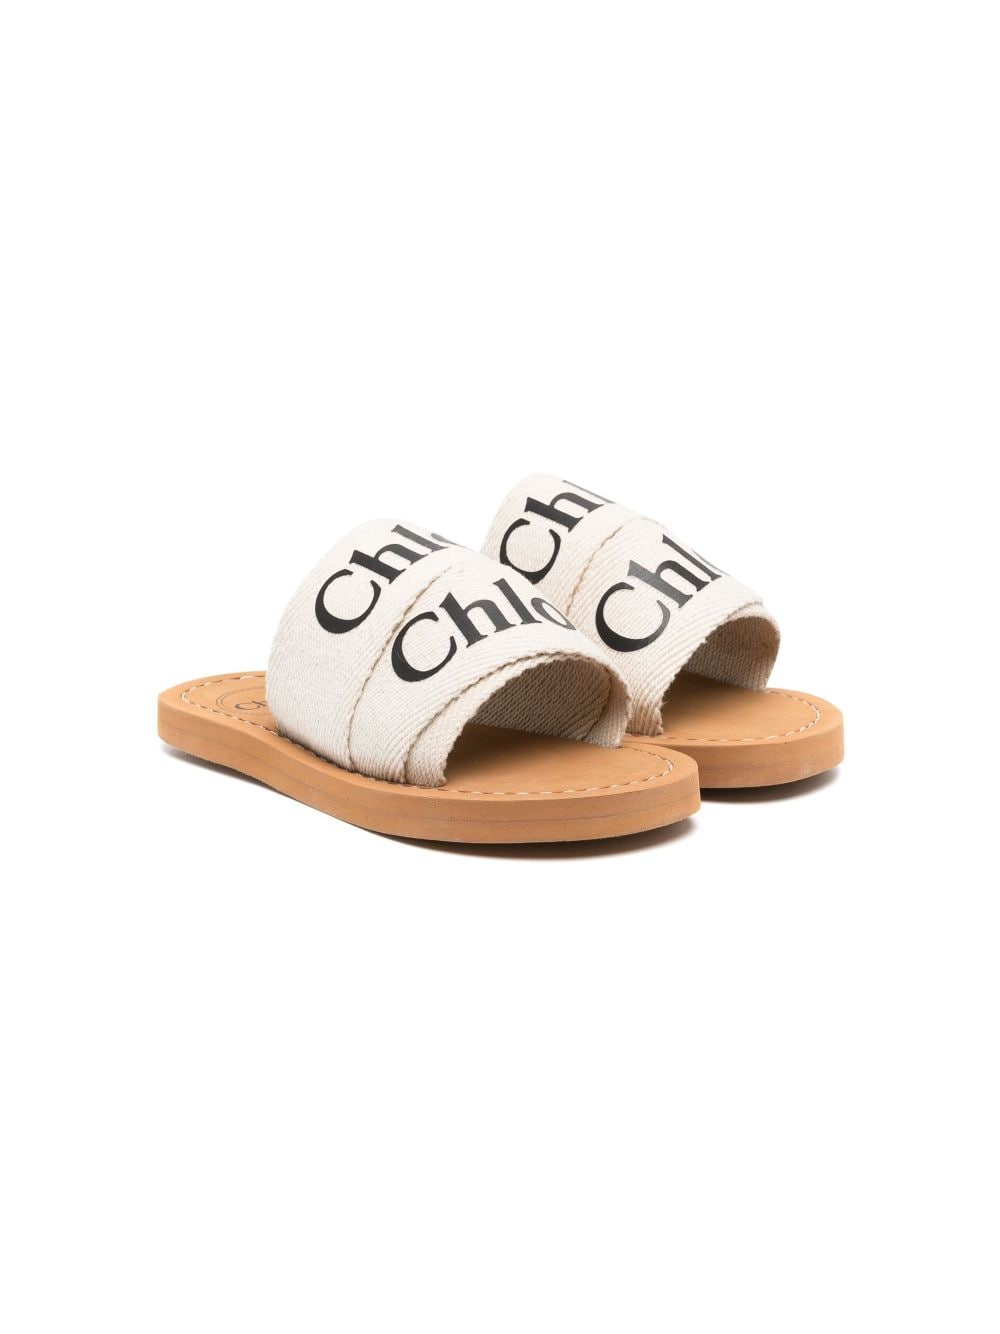 Chloé Kids' Sandals With Print In Ivory